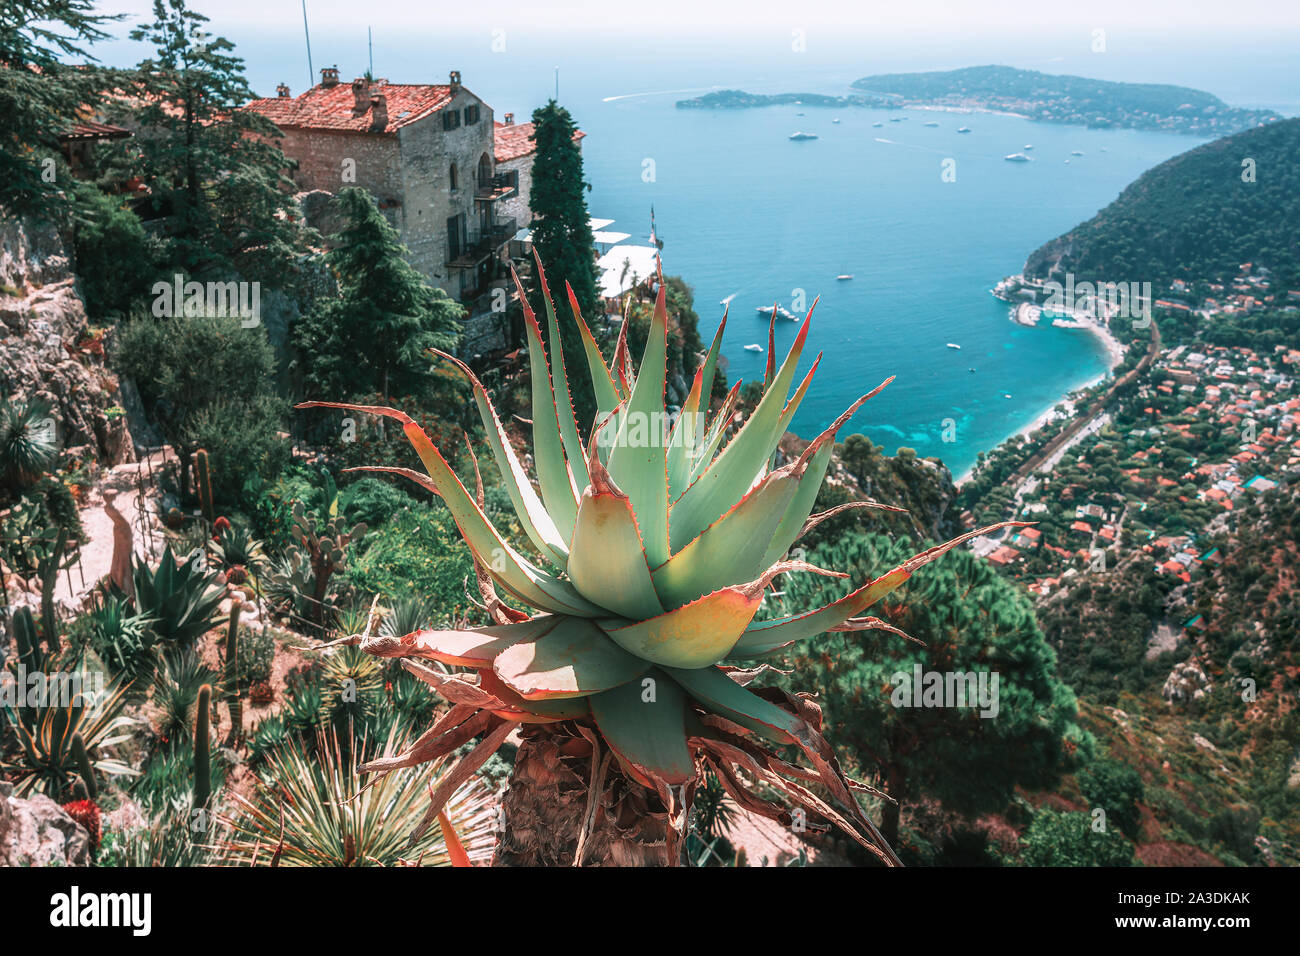 eautiful view on the Mediterranean Sea with the focus on an Aloe Vera on stem  in the botanical garden of medieval village Eze in France Stock Photo